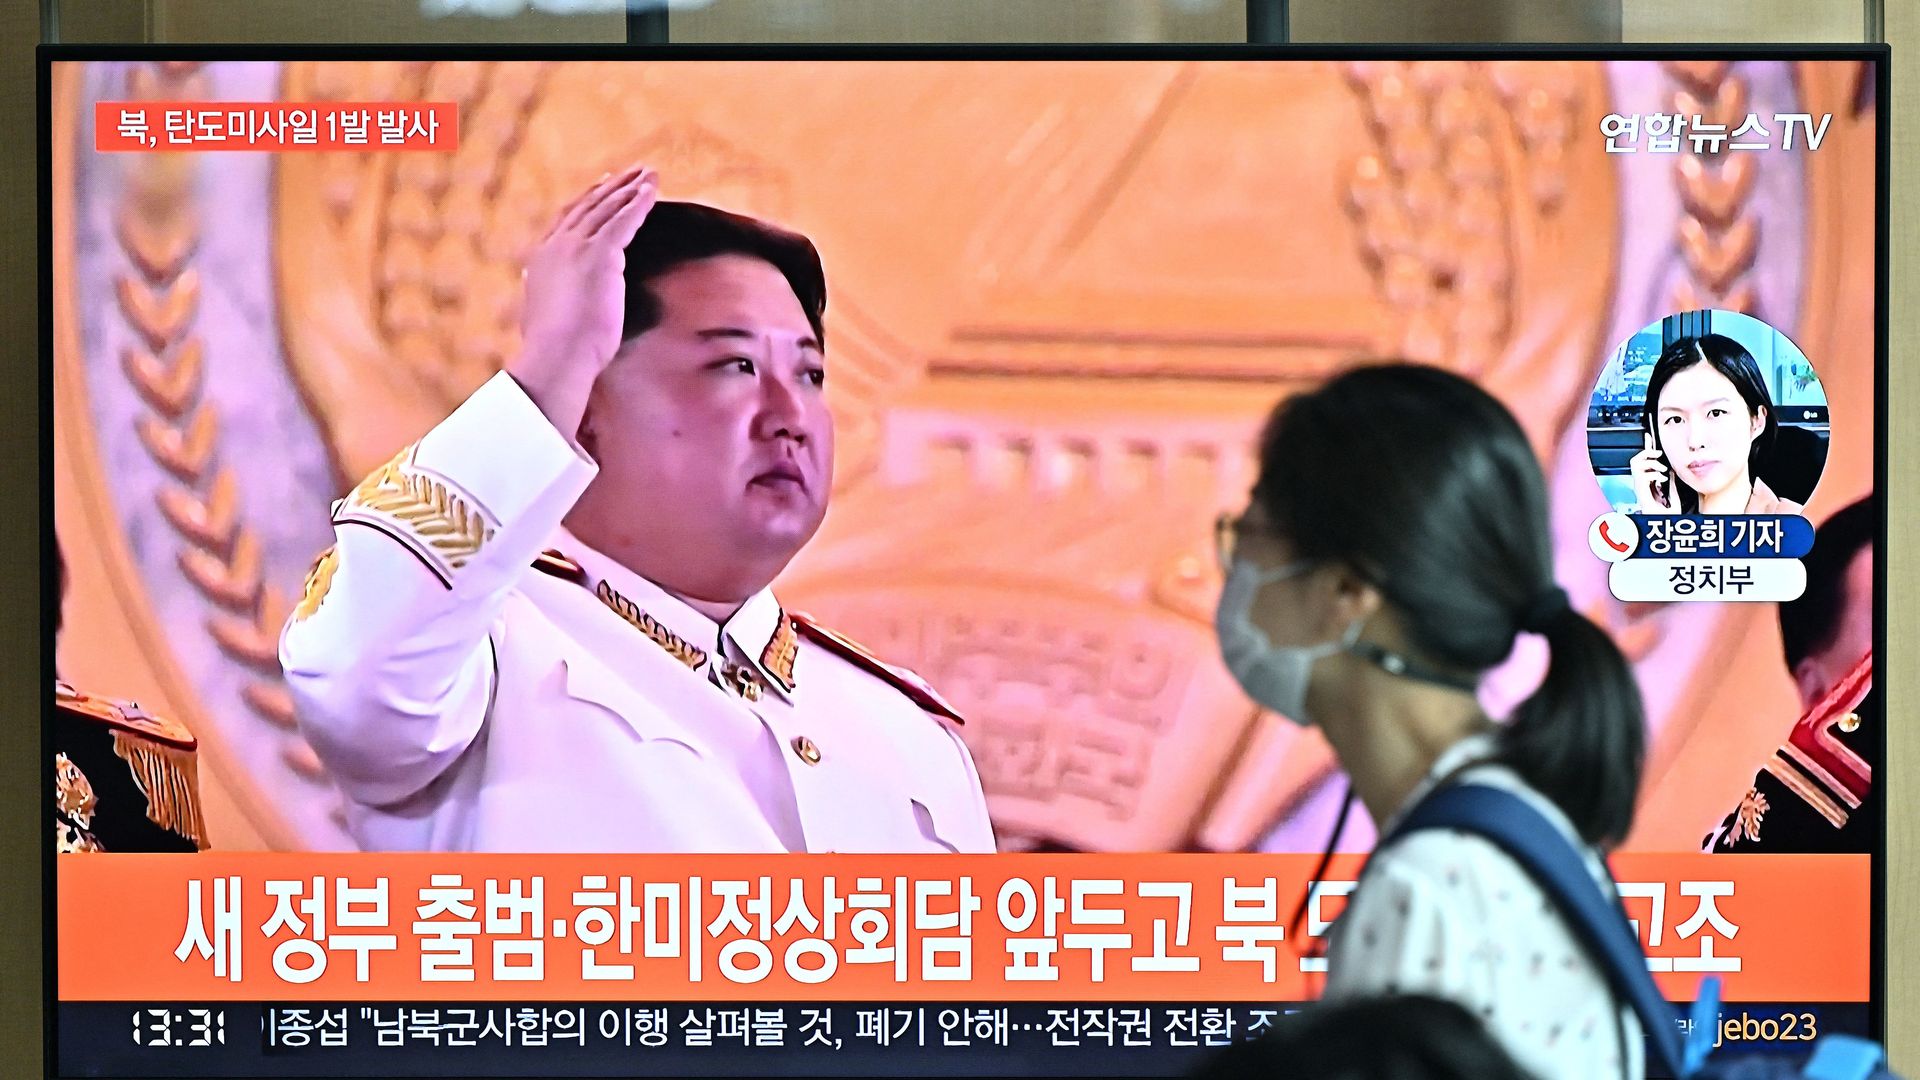 A woman walks past a television screen showing a news broadcast with file footage of North Korean leader Kim Jong Un, at a railway station in Seoul on May 4.